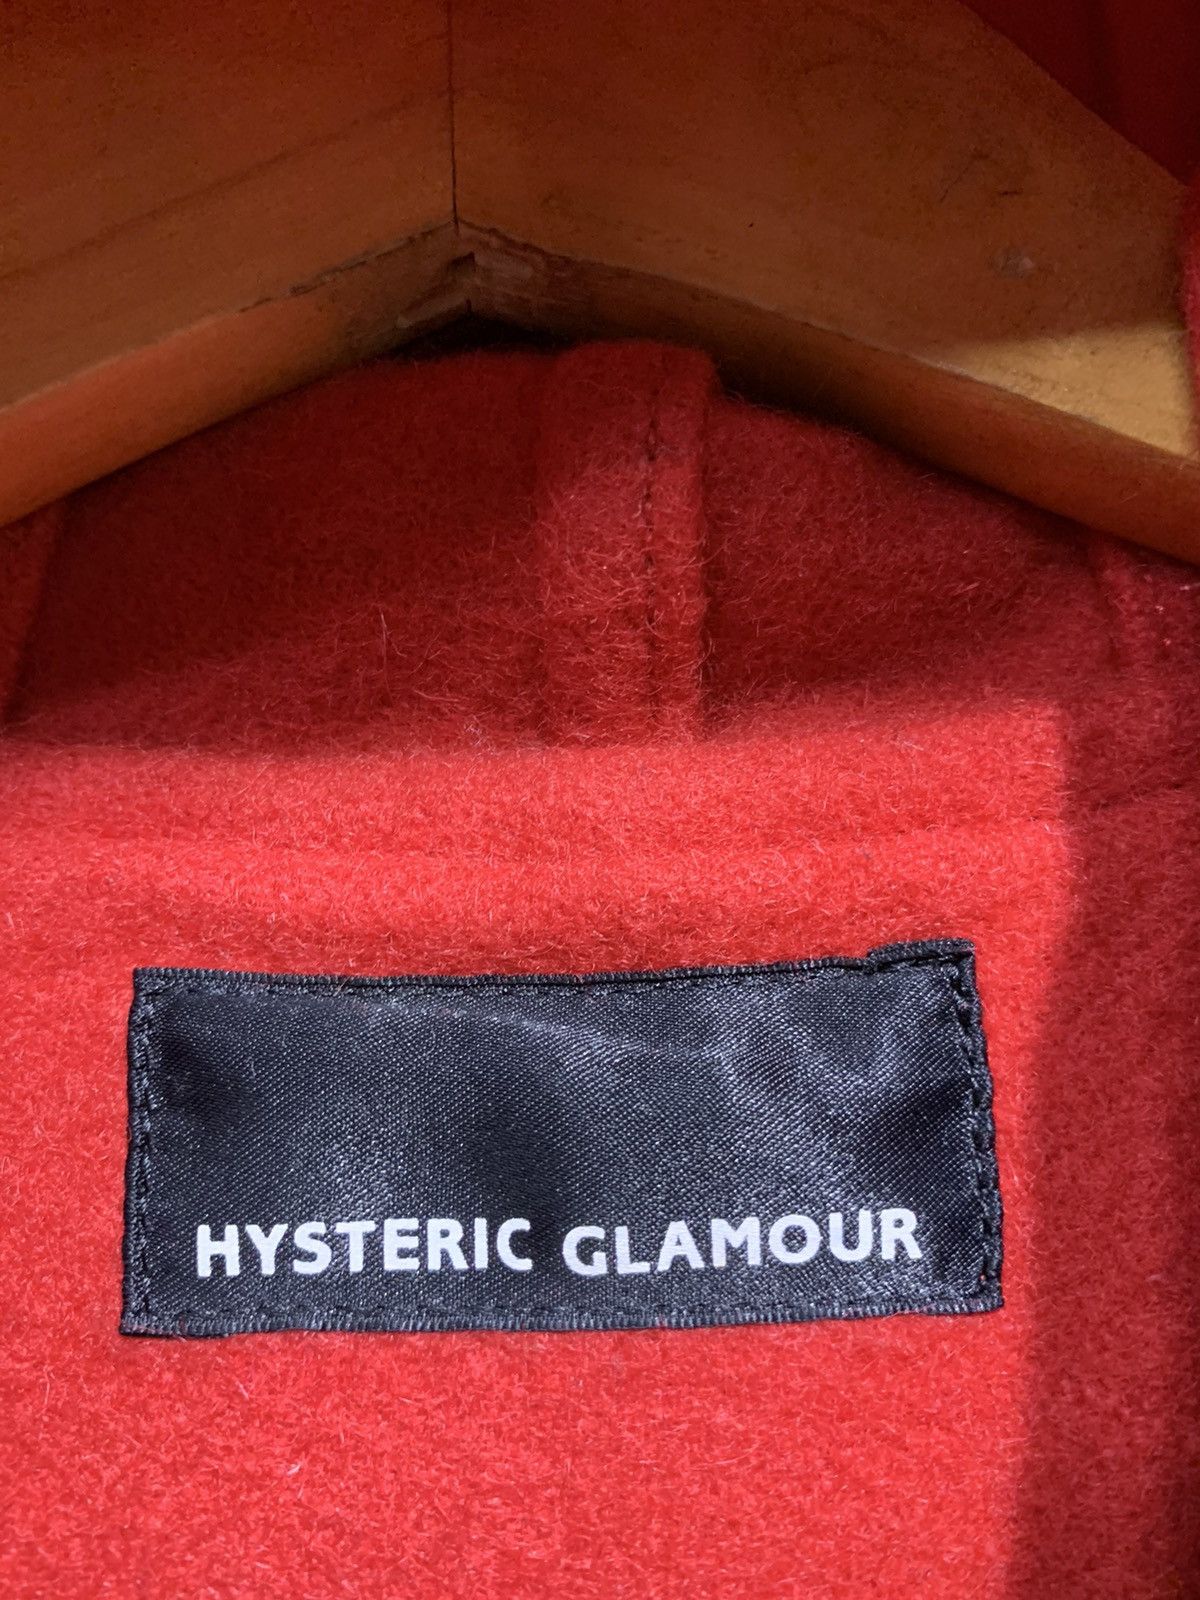 🔥HYSTERIC GLAMOUR WOOL DUFFLE COATS - 11